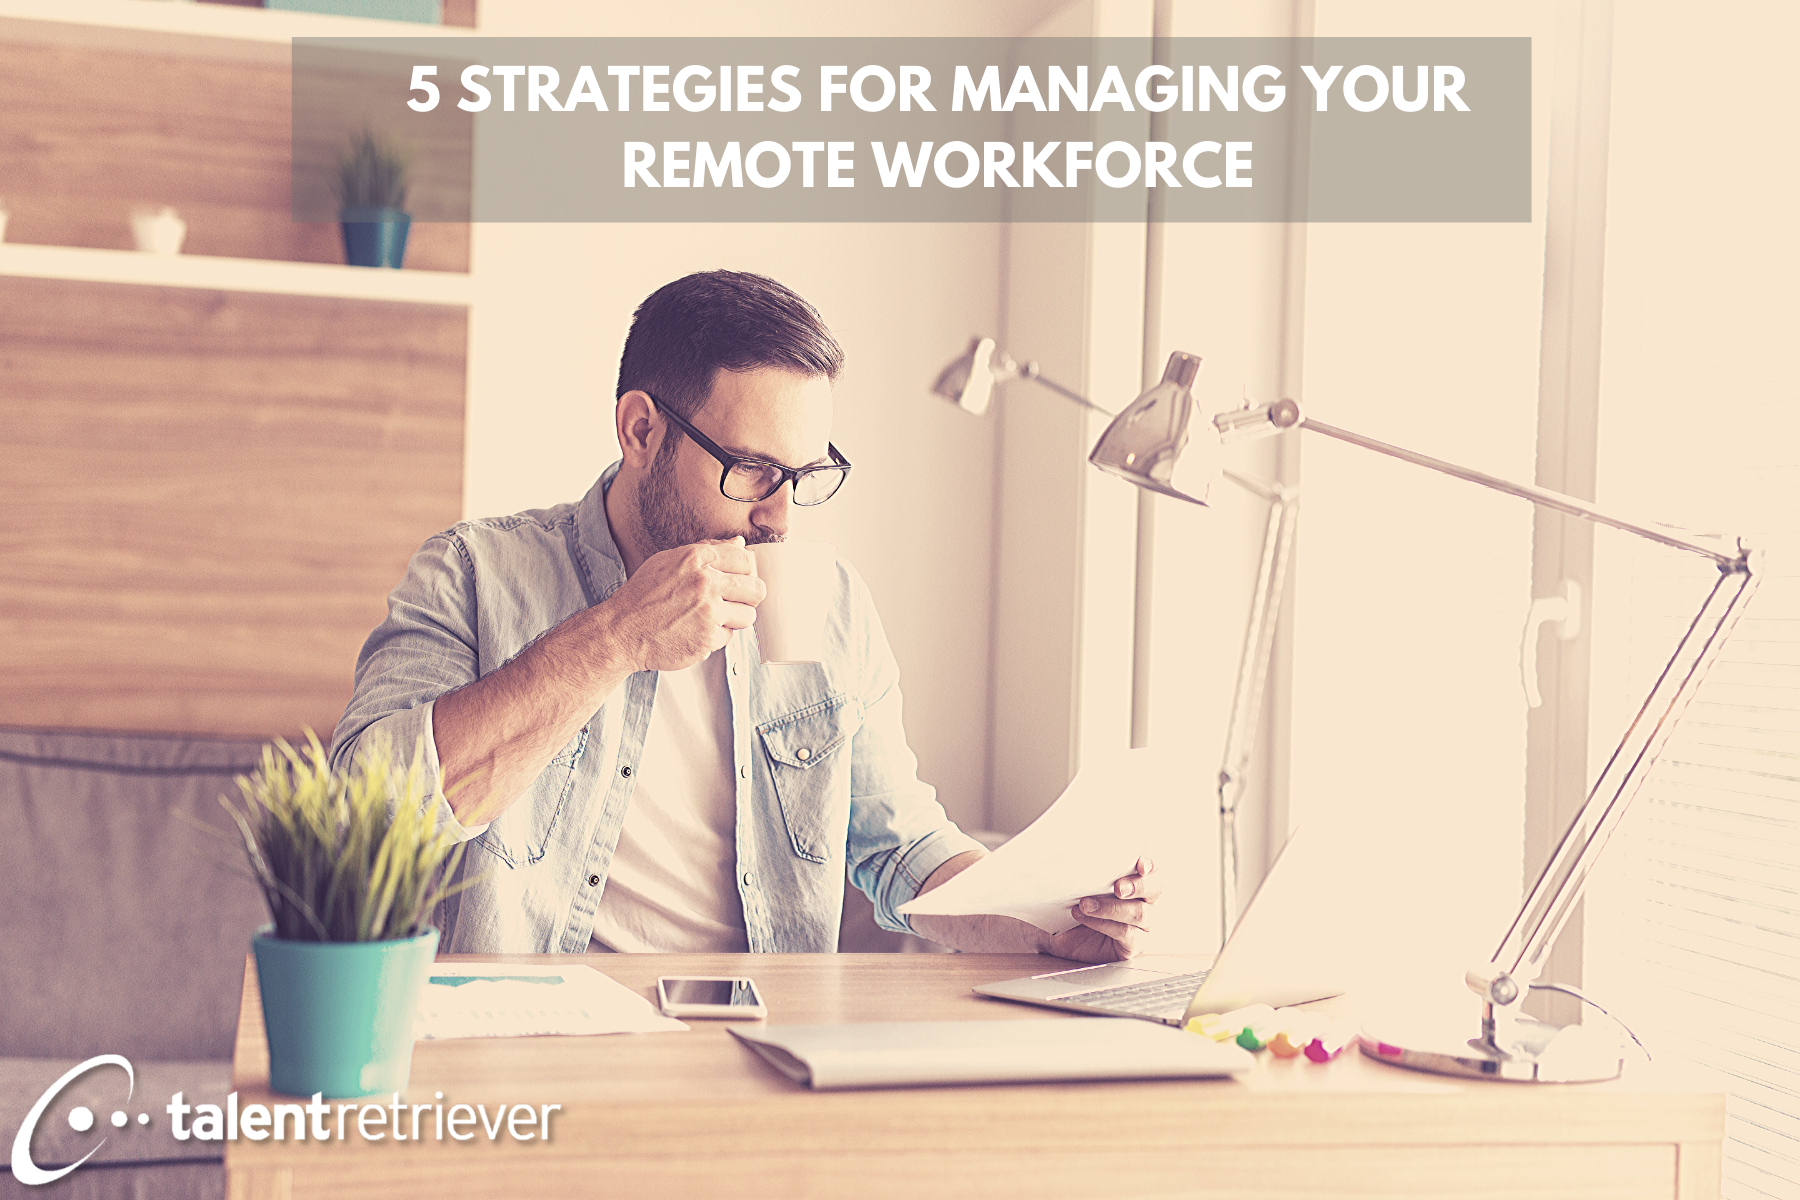 5 Strategies for Managing Your Remote Workforce During the Coronavirus Outbreak